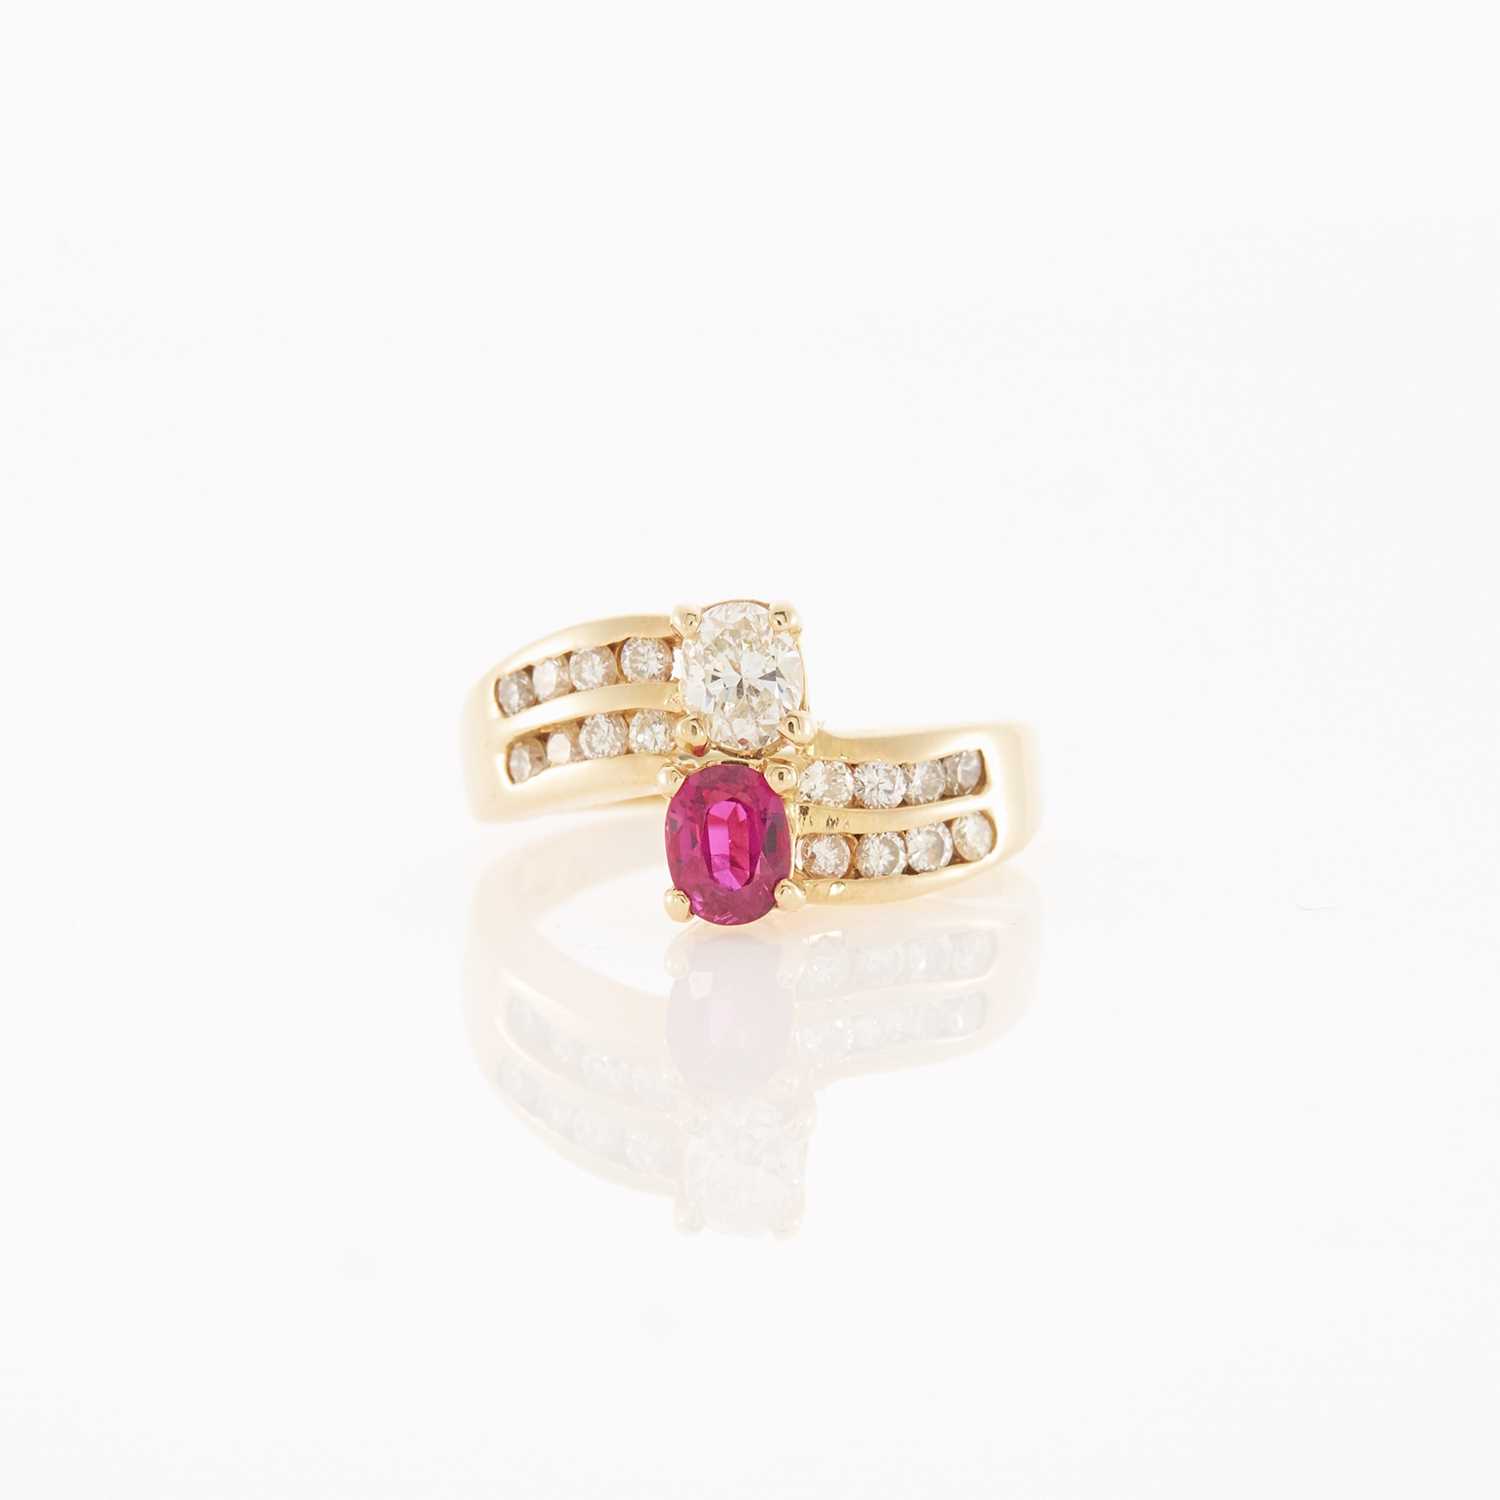 Lot 2044 - Gold, Ruby and Diamond Crossover Ring